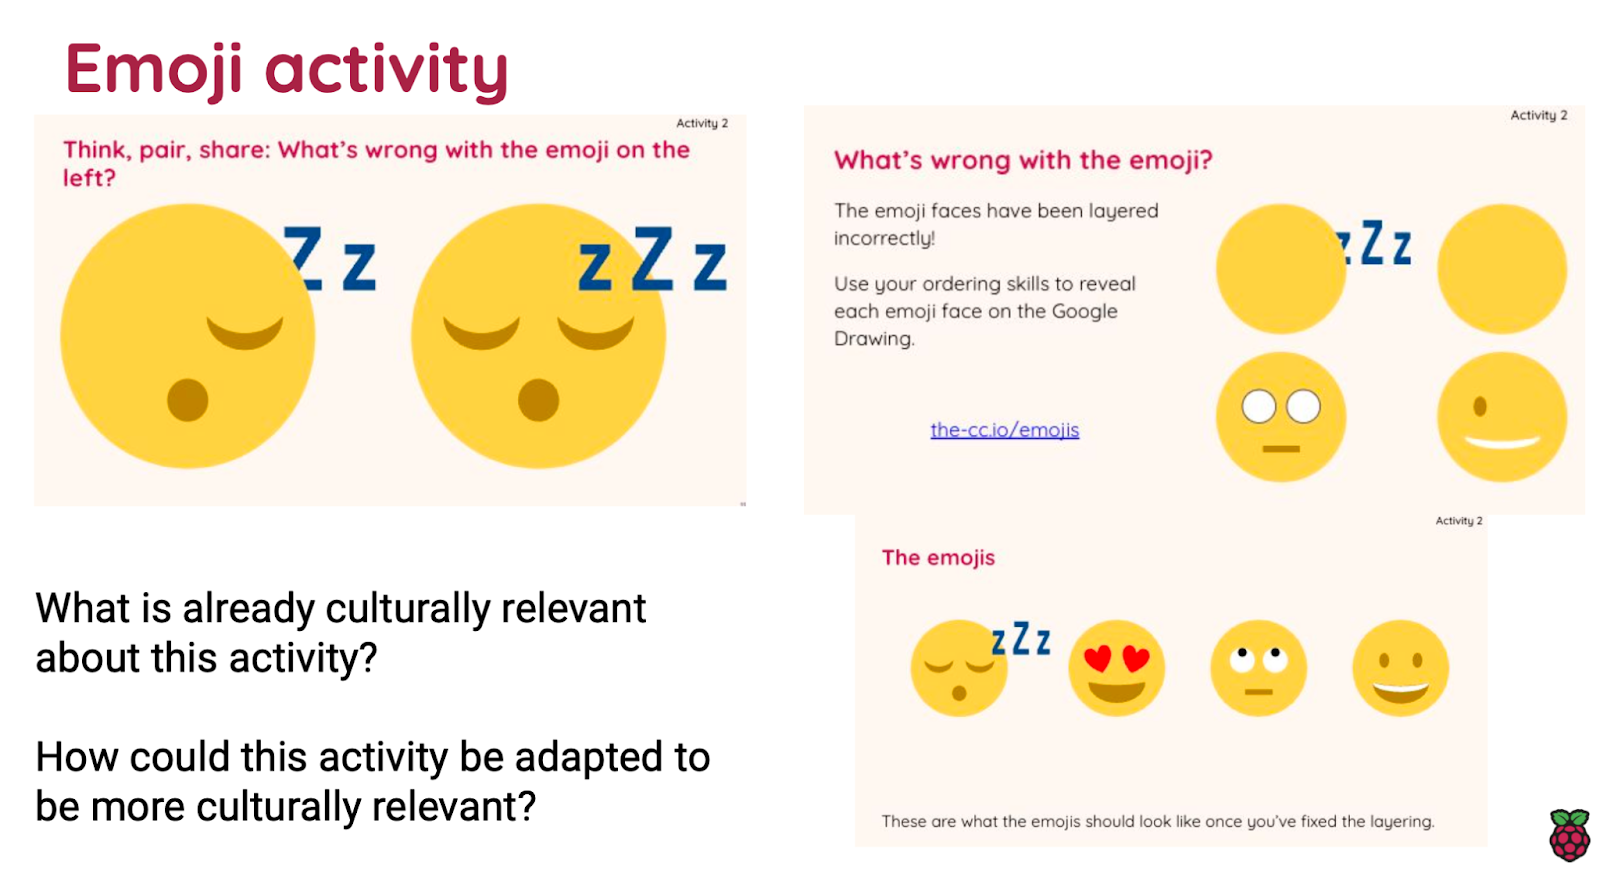 A slide about adapting an emoji teaching activity to make it culturally relevant.